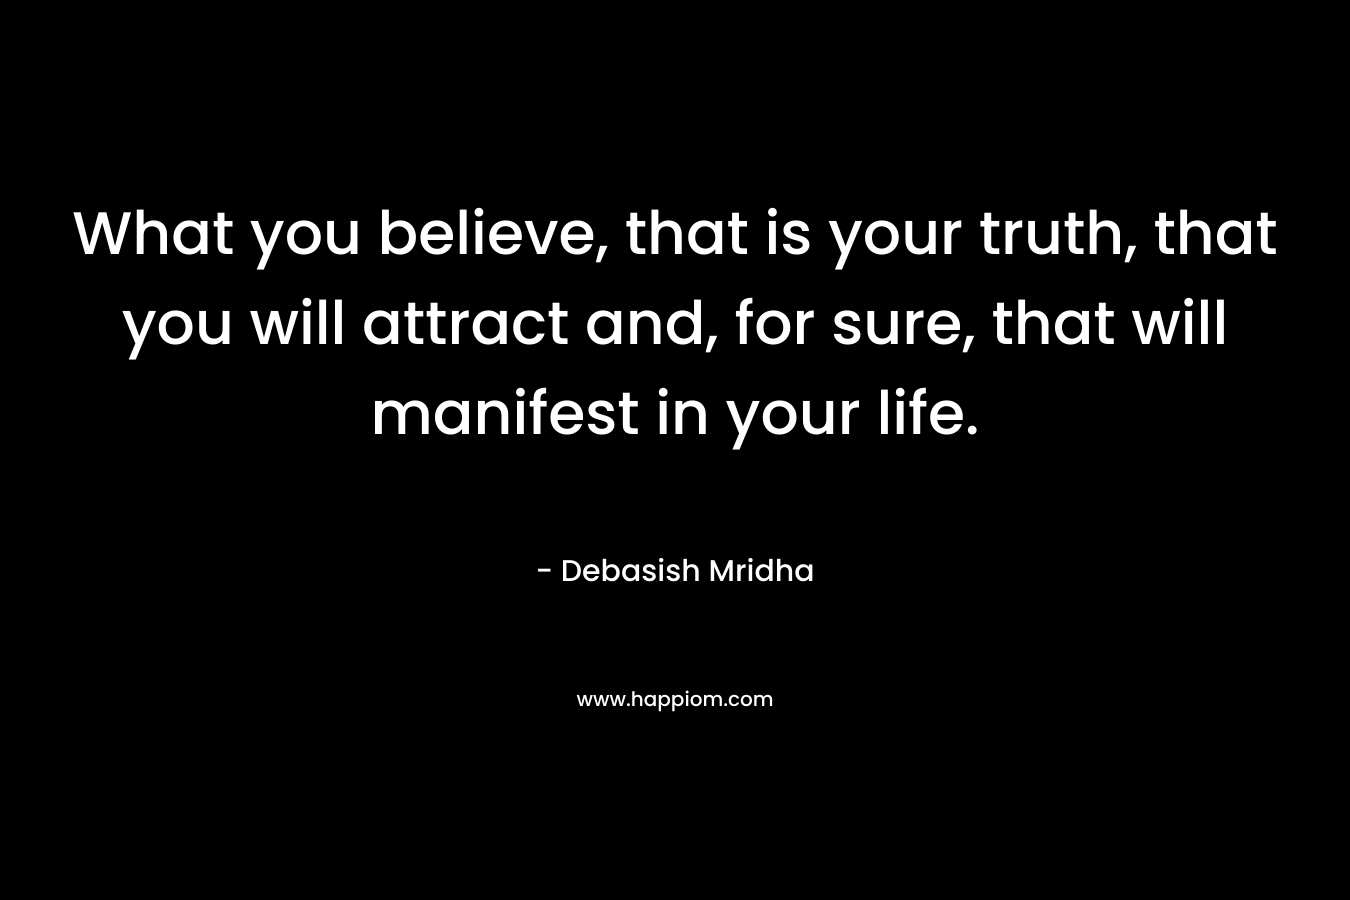 What you believe, that is your truth, that you will attract and, for sure, that will manifest in your life.